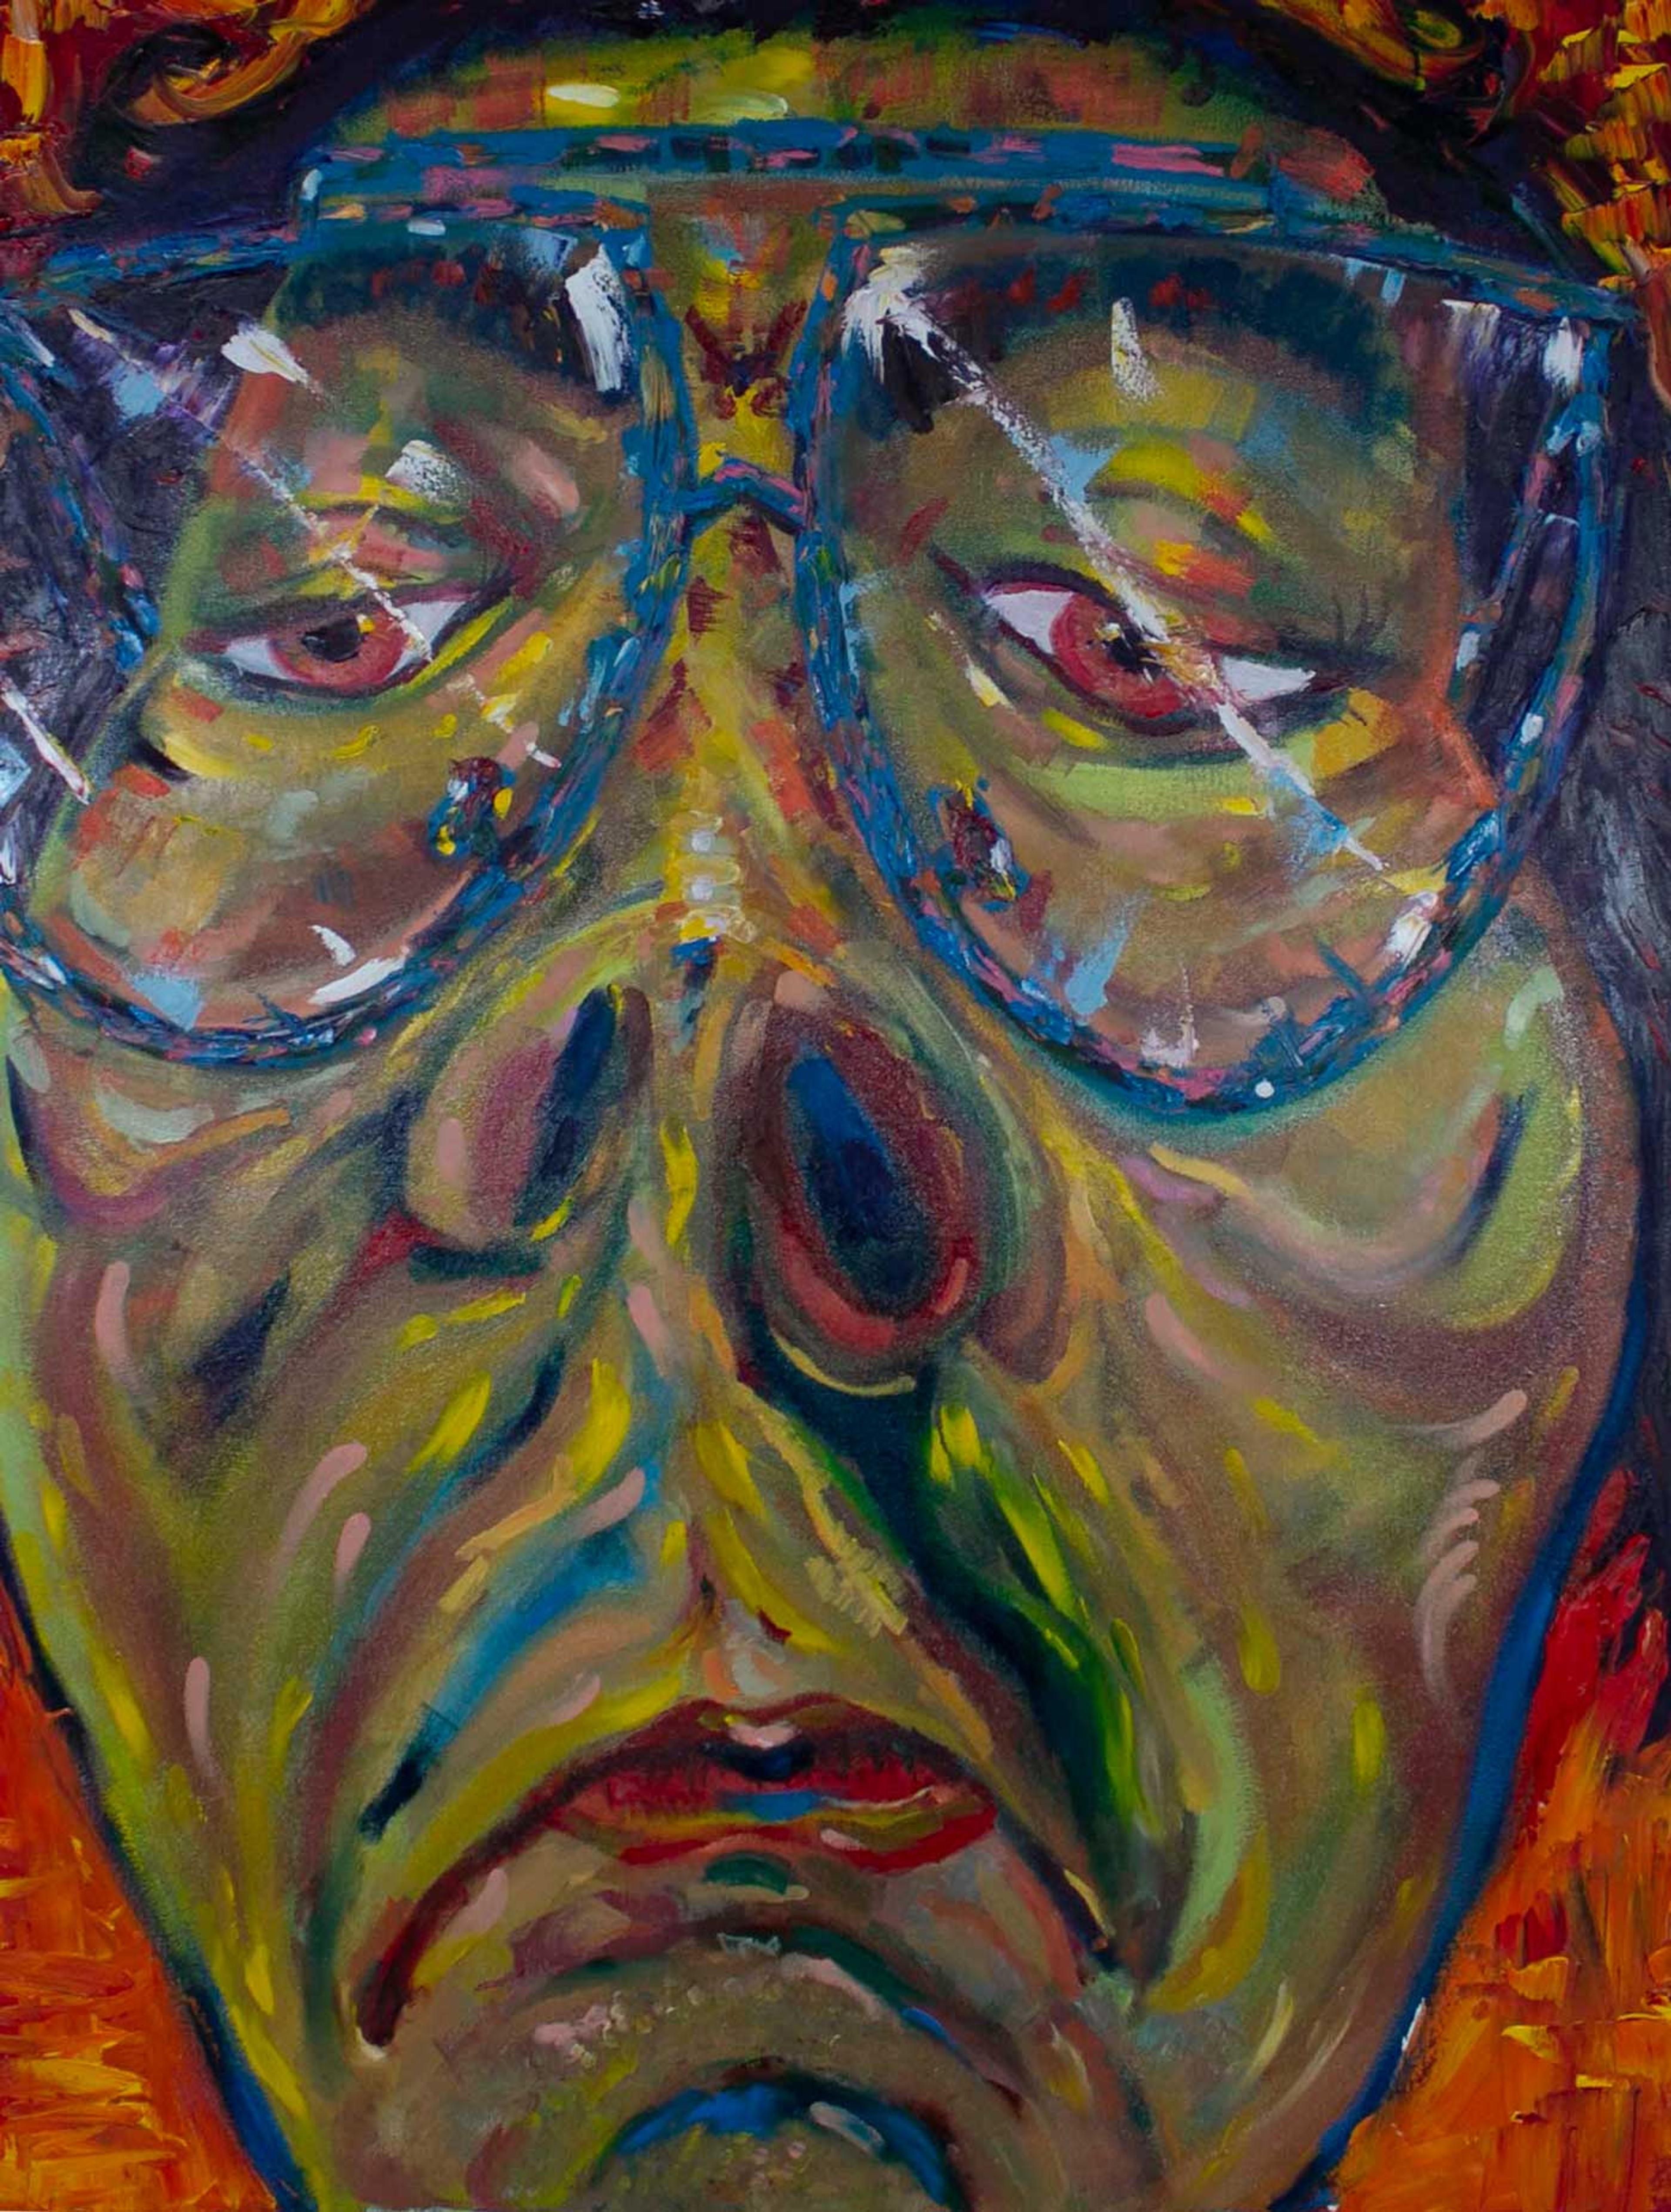 Painting of a face wearing glasses and a sad expression.